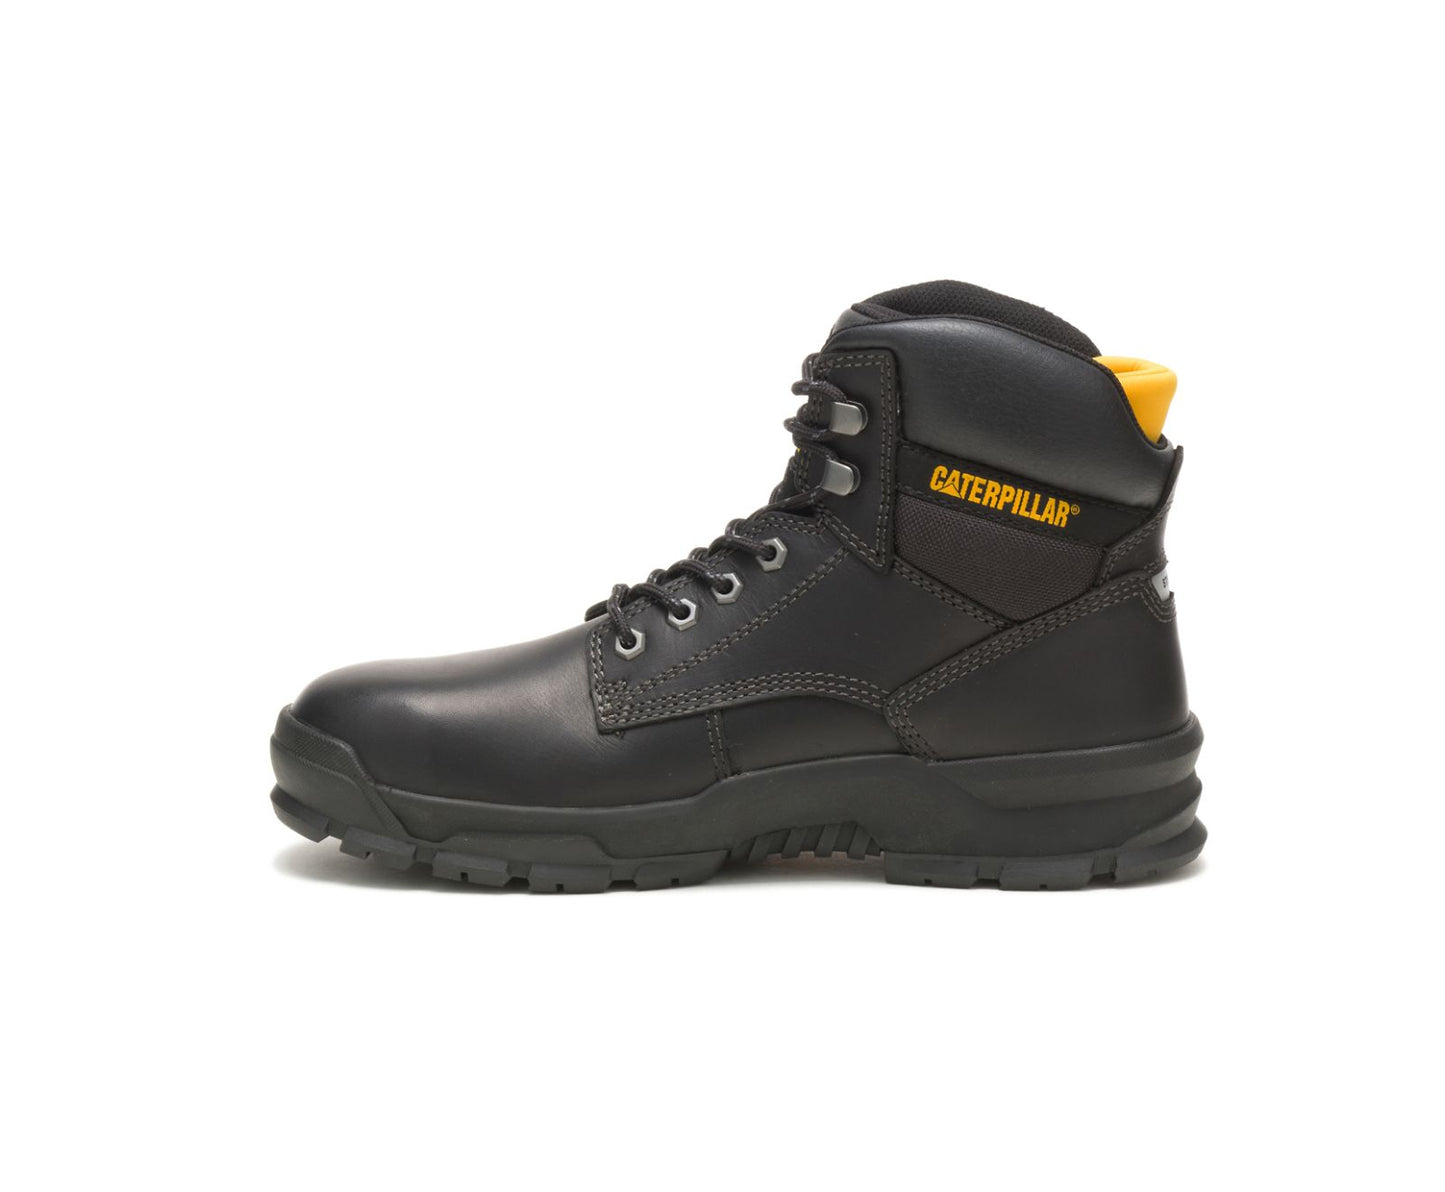 P91267 Mobilize Alloy Toe Work Boot